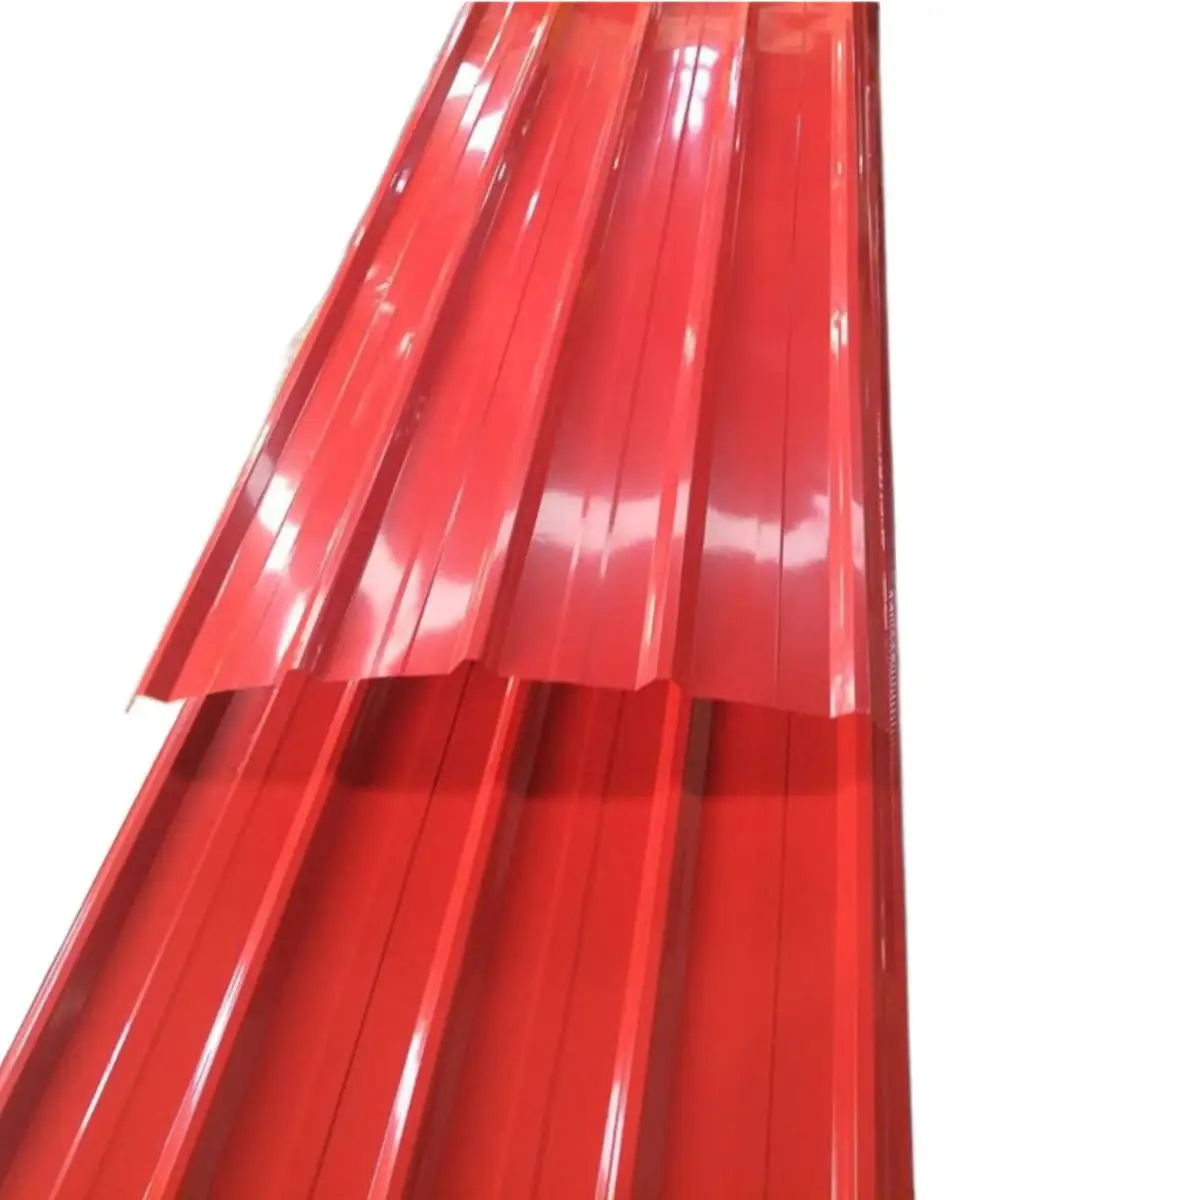 Lifetime Corrugated Galvanized Aluminium Roof Sheet Prices, Color Stone Coated Metal Roofing